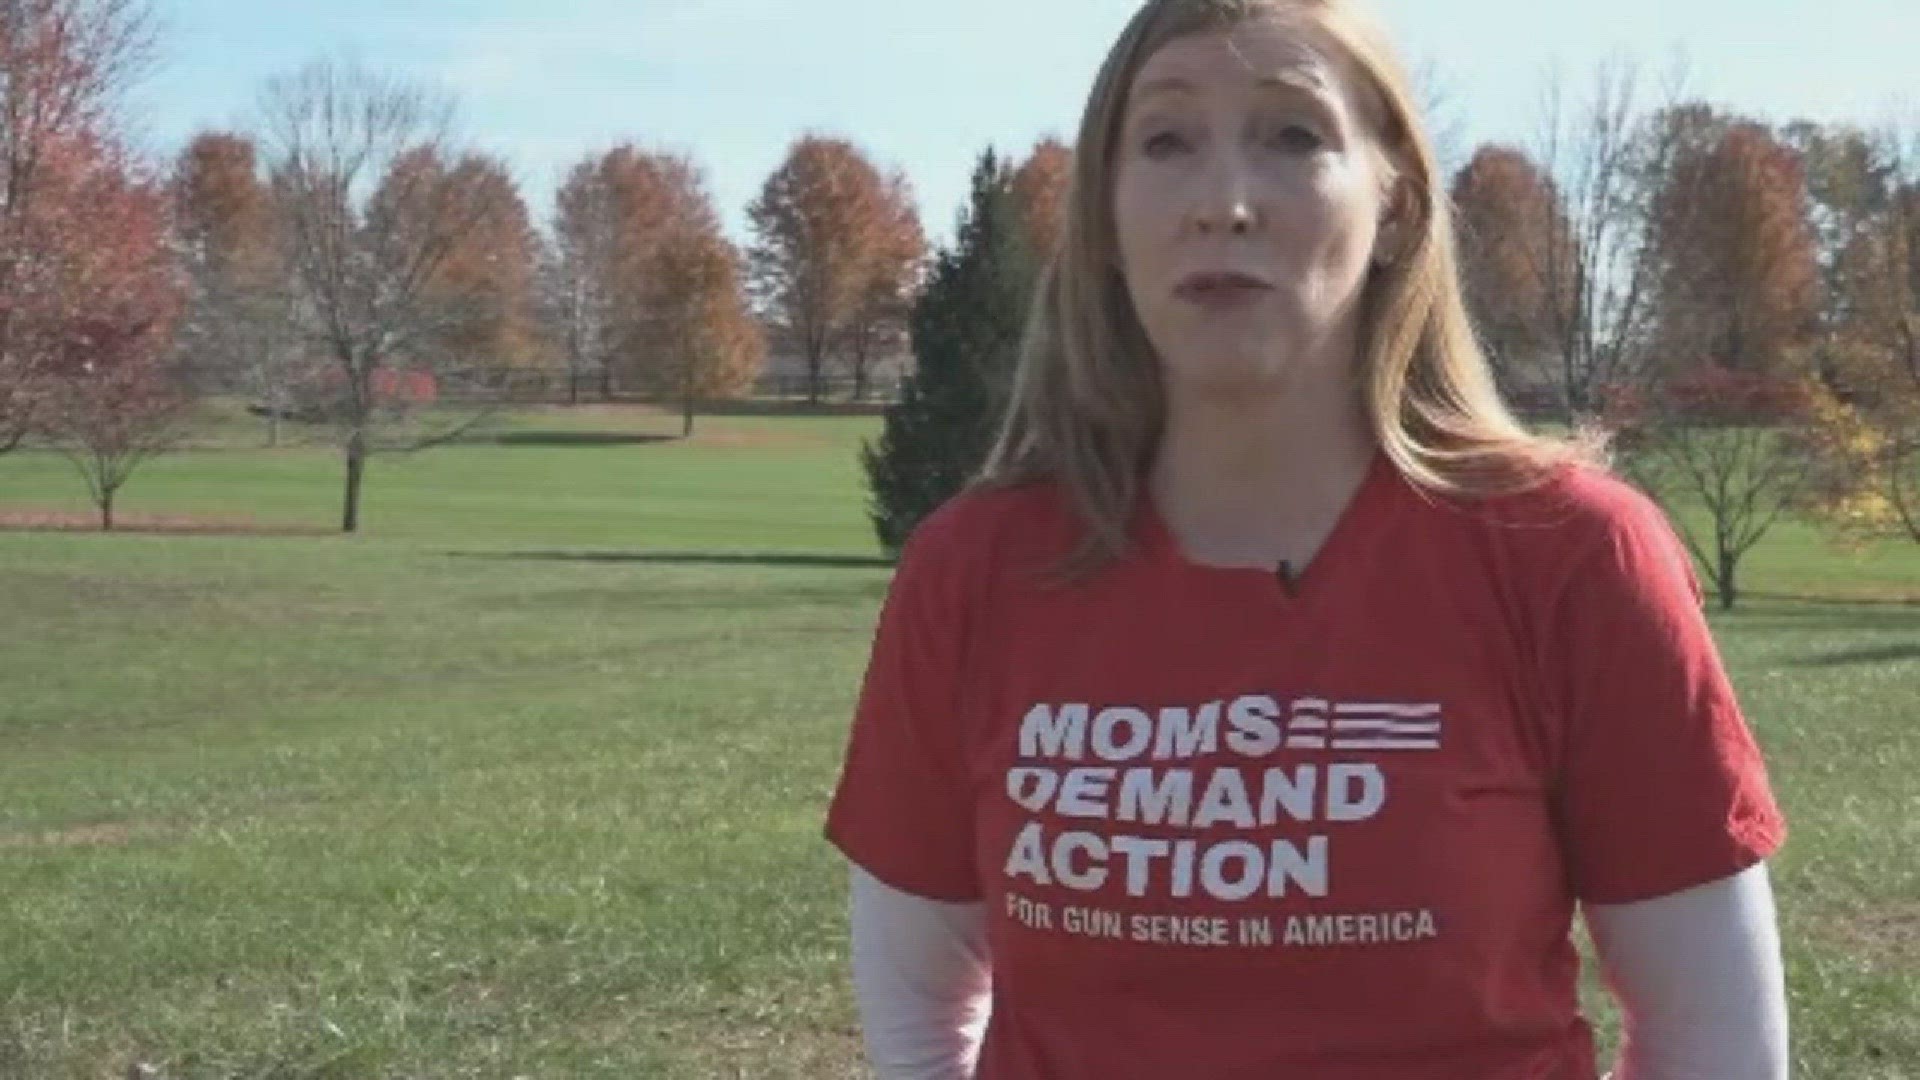 Connie Coartney with Moms Demand Action on concealed carry in churches